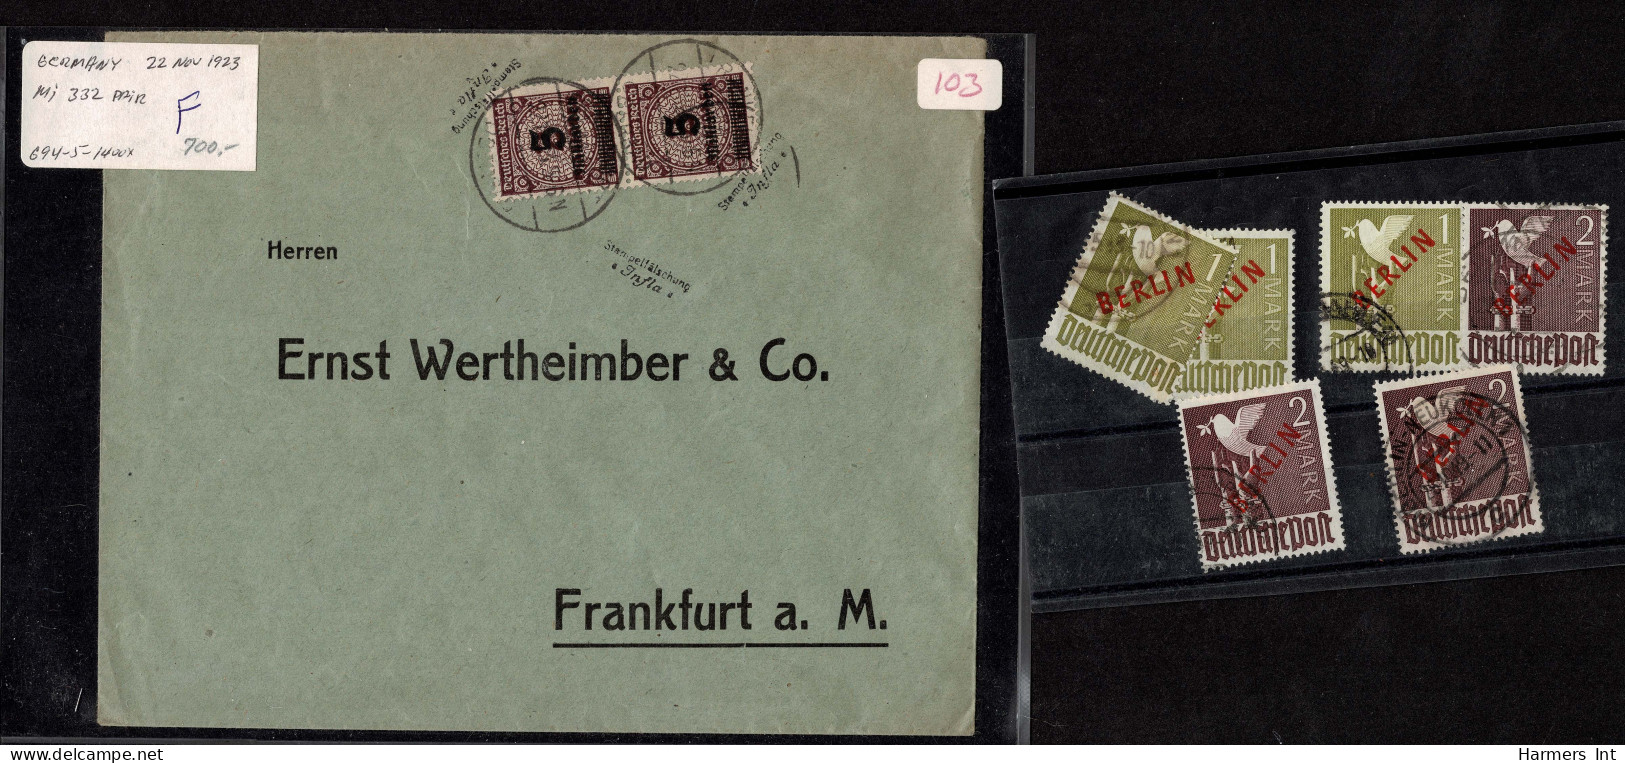 Lot # 343 Germany: Selection of WWII counterfeits by allies